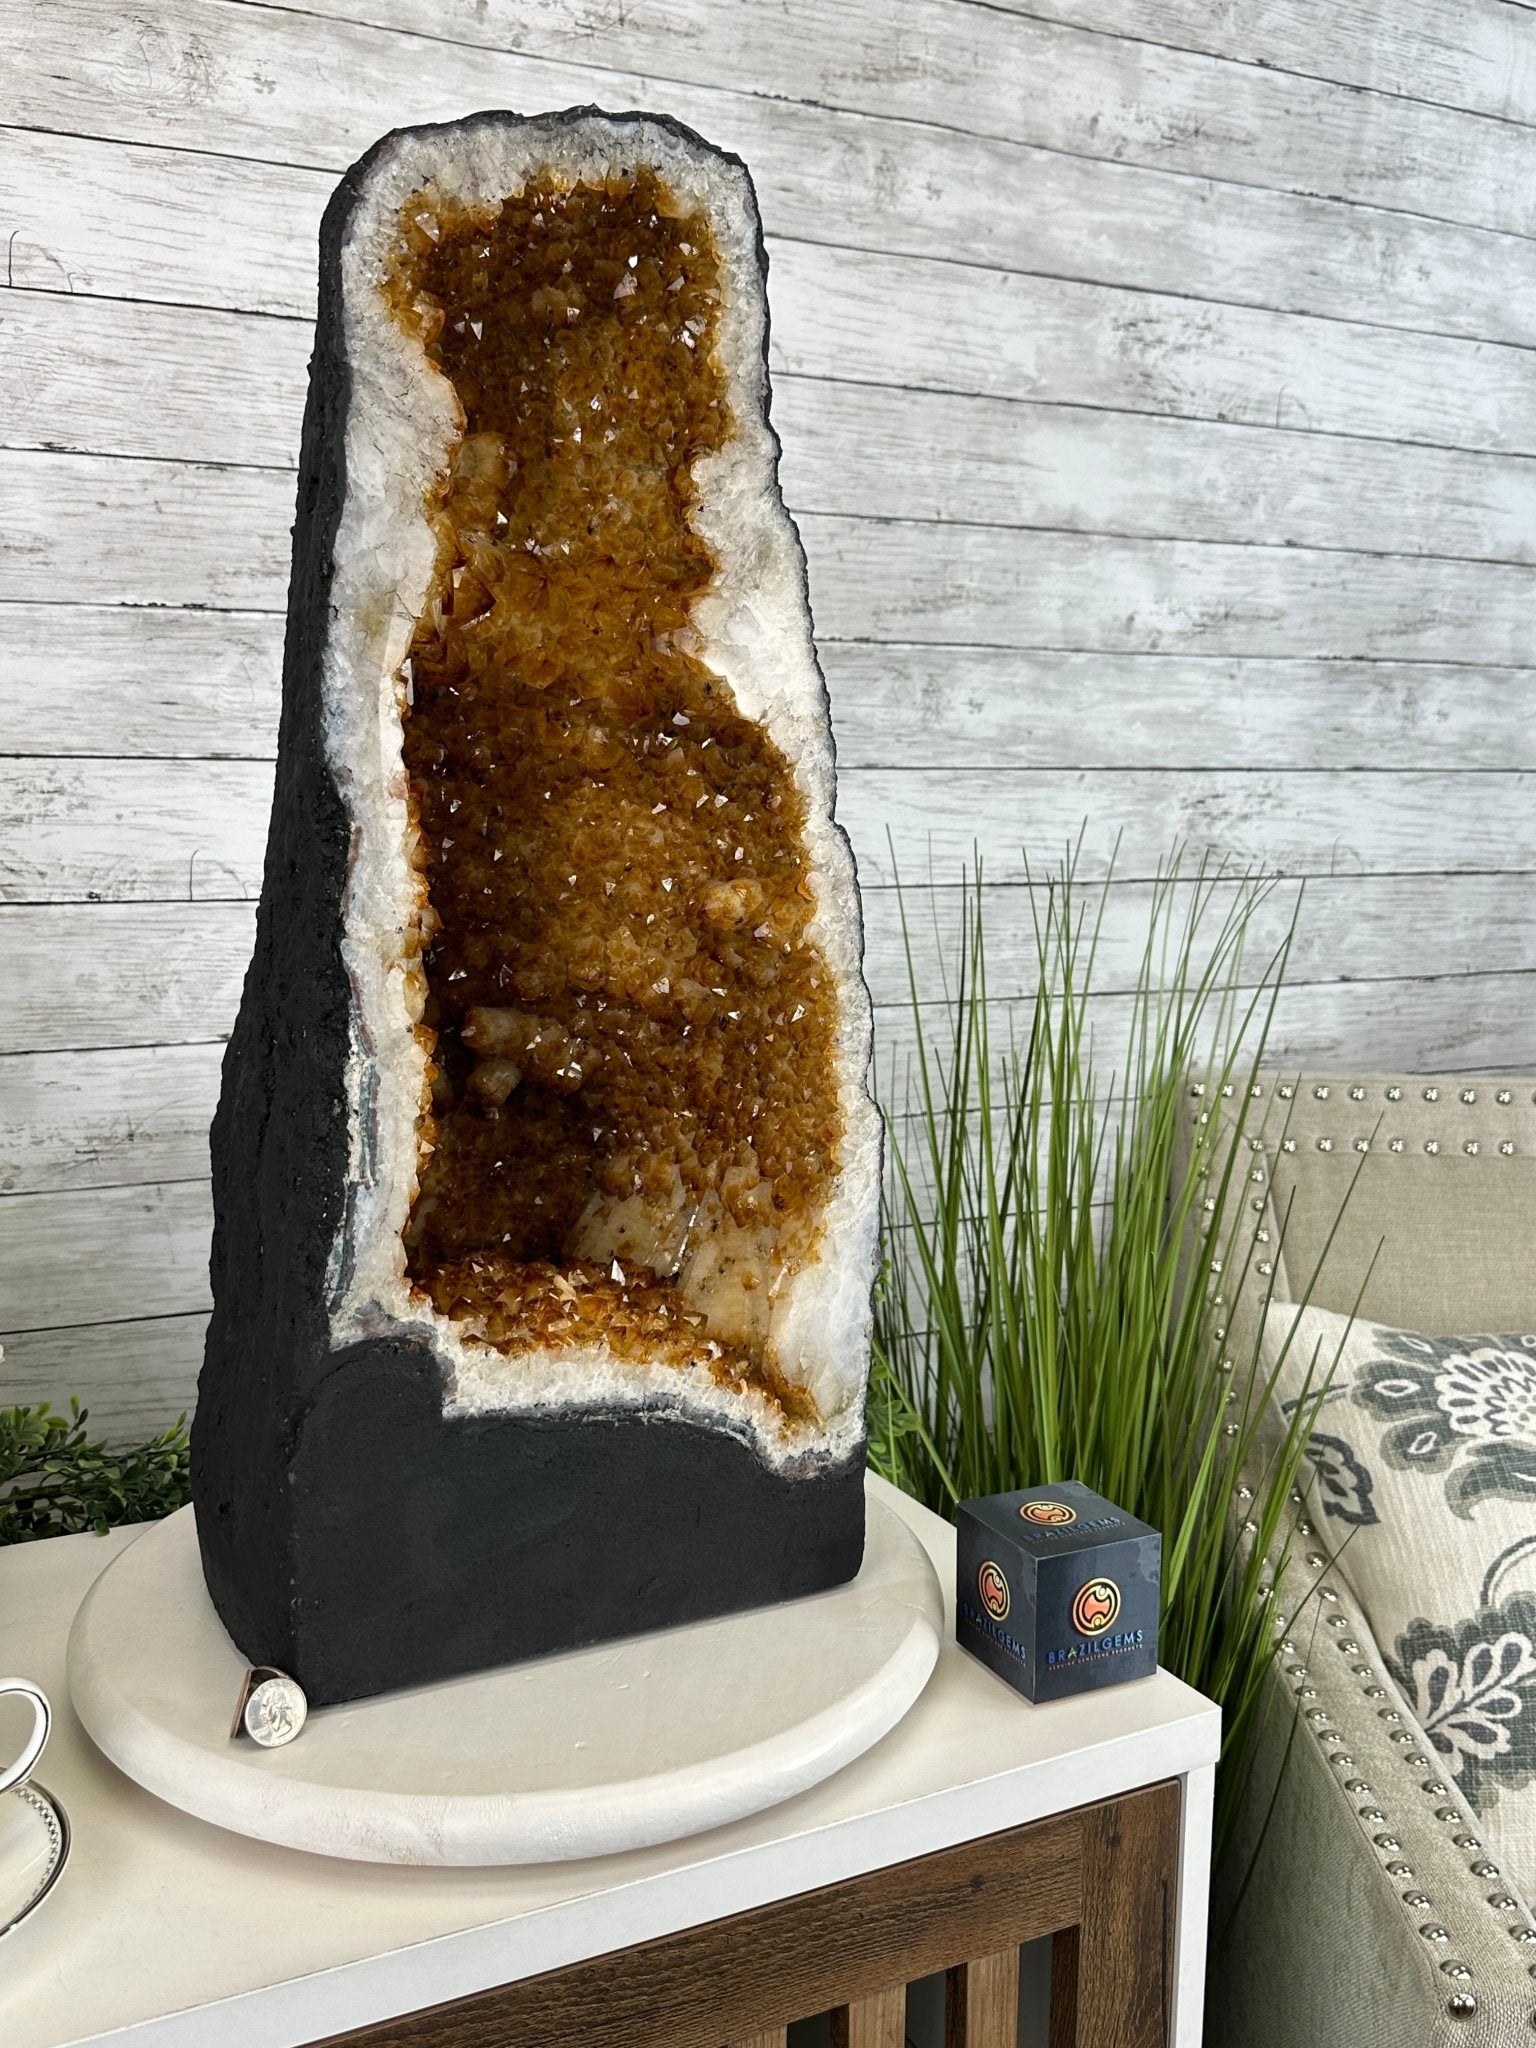 Extra Quality Citrine Cathedral, 72.5 lbs & 23.3" Tall #5603-0301 by Brazil Gems® - Brazil GemsBrazil GemsExtra Quality Citrine Cathedral, 72.5 lbs & 23.3" Tall #5603-0301 by Brazil Gems®Cathedrals5603-0301